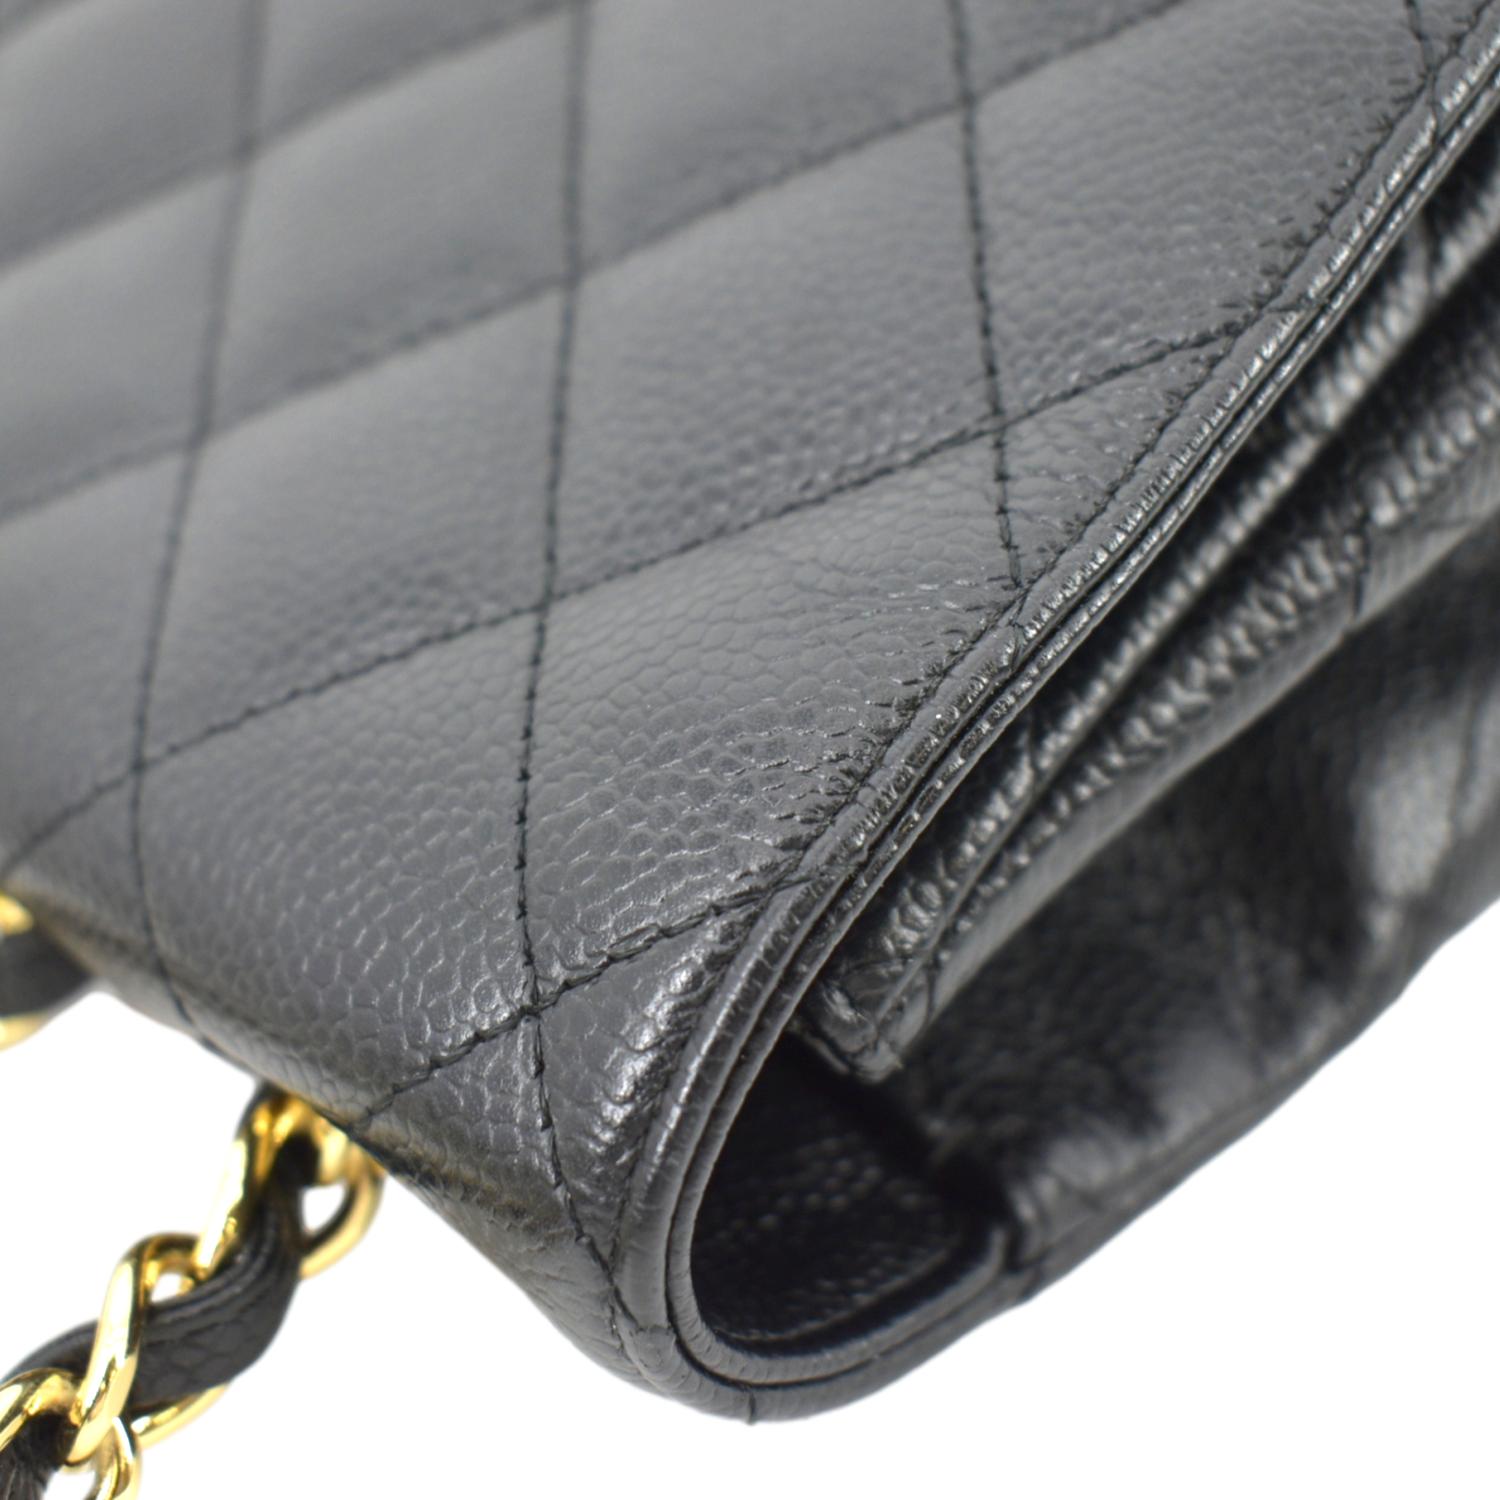 Chanel Classic Jumbo Single Flap Quilted Caviar Leather Shoulder Bag Black